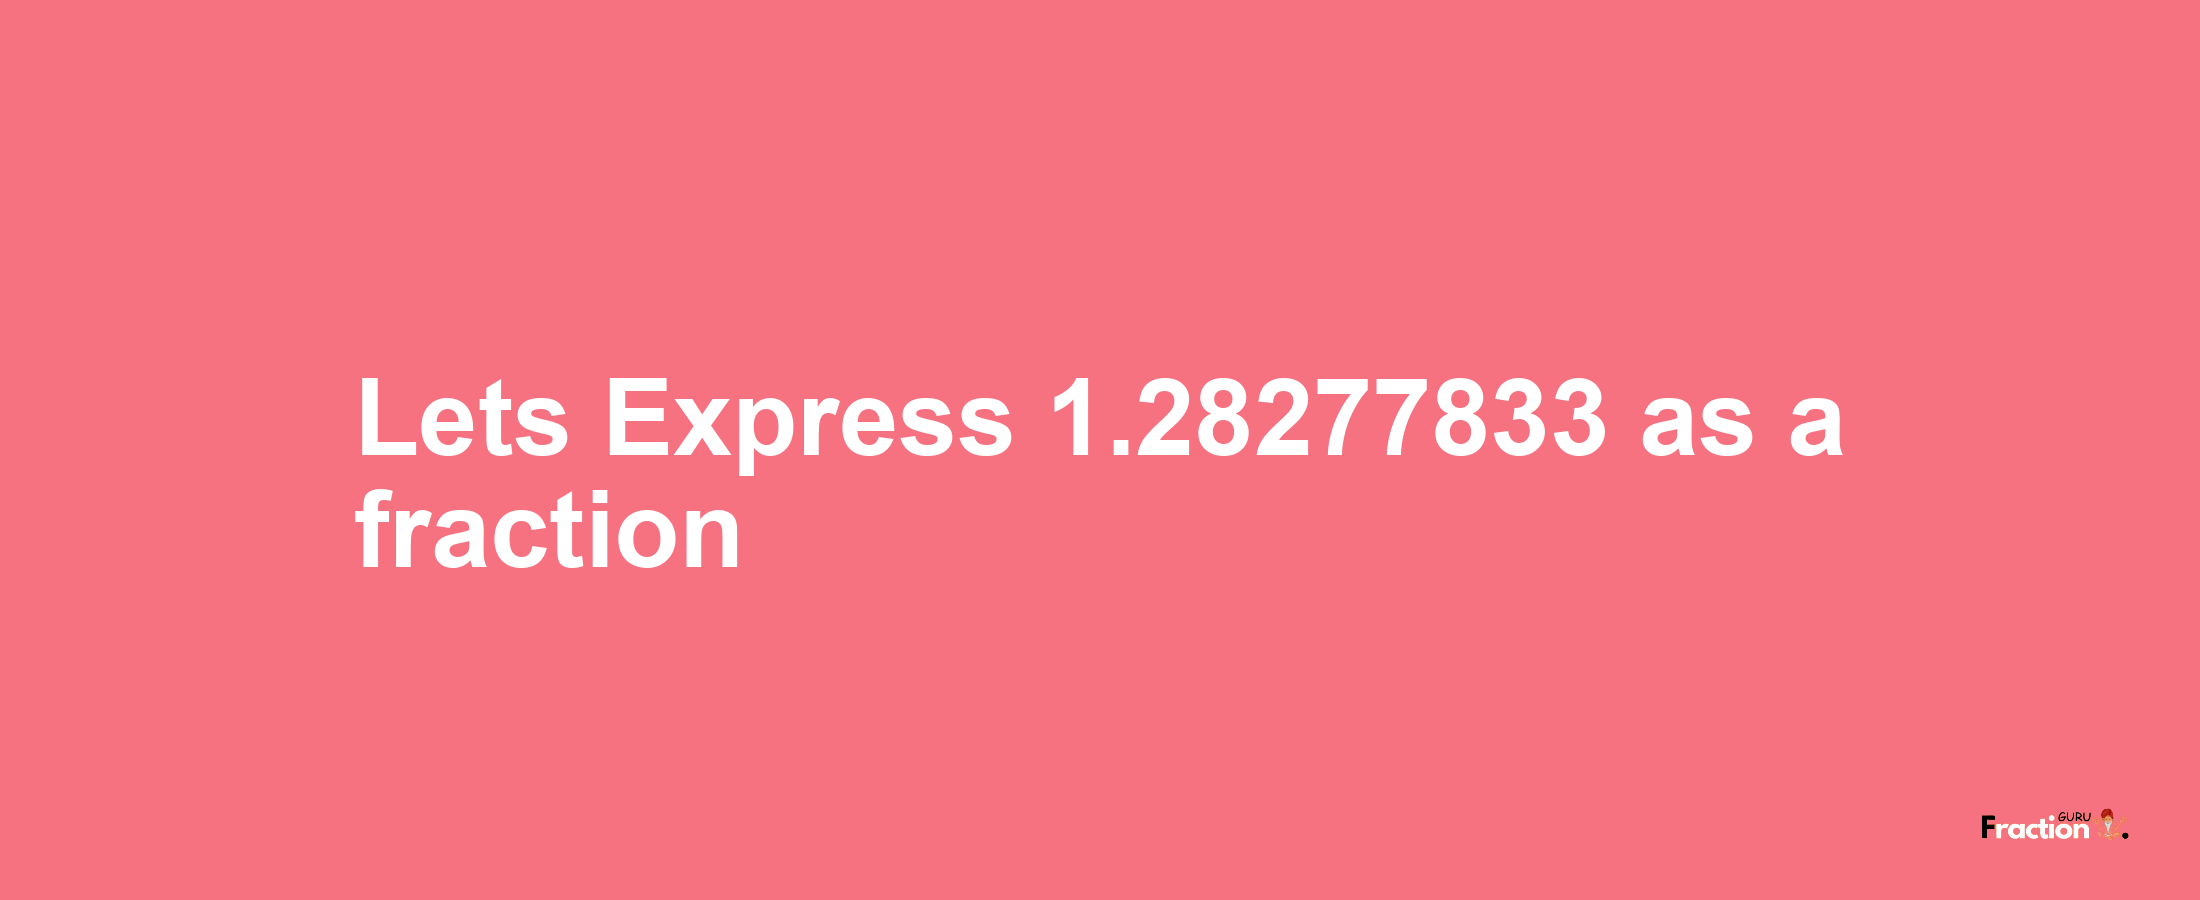 Lets Express 1.28277833 as afraction